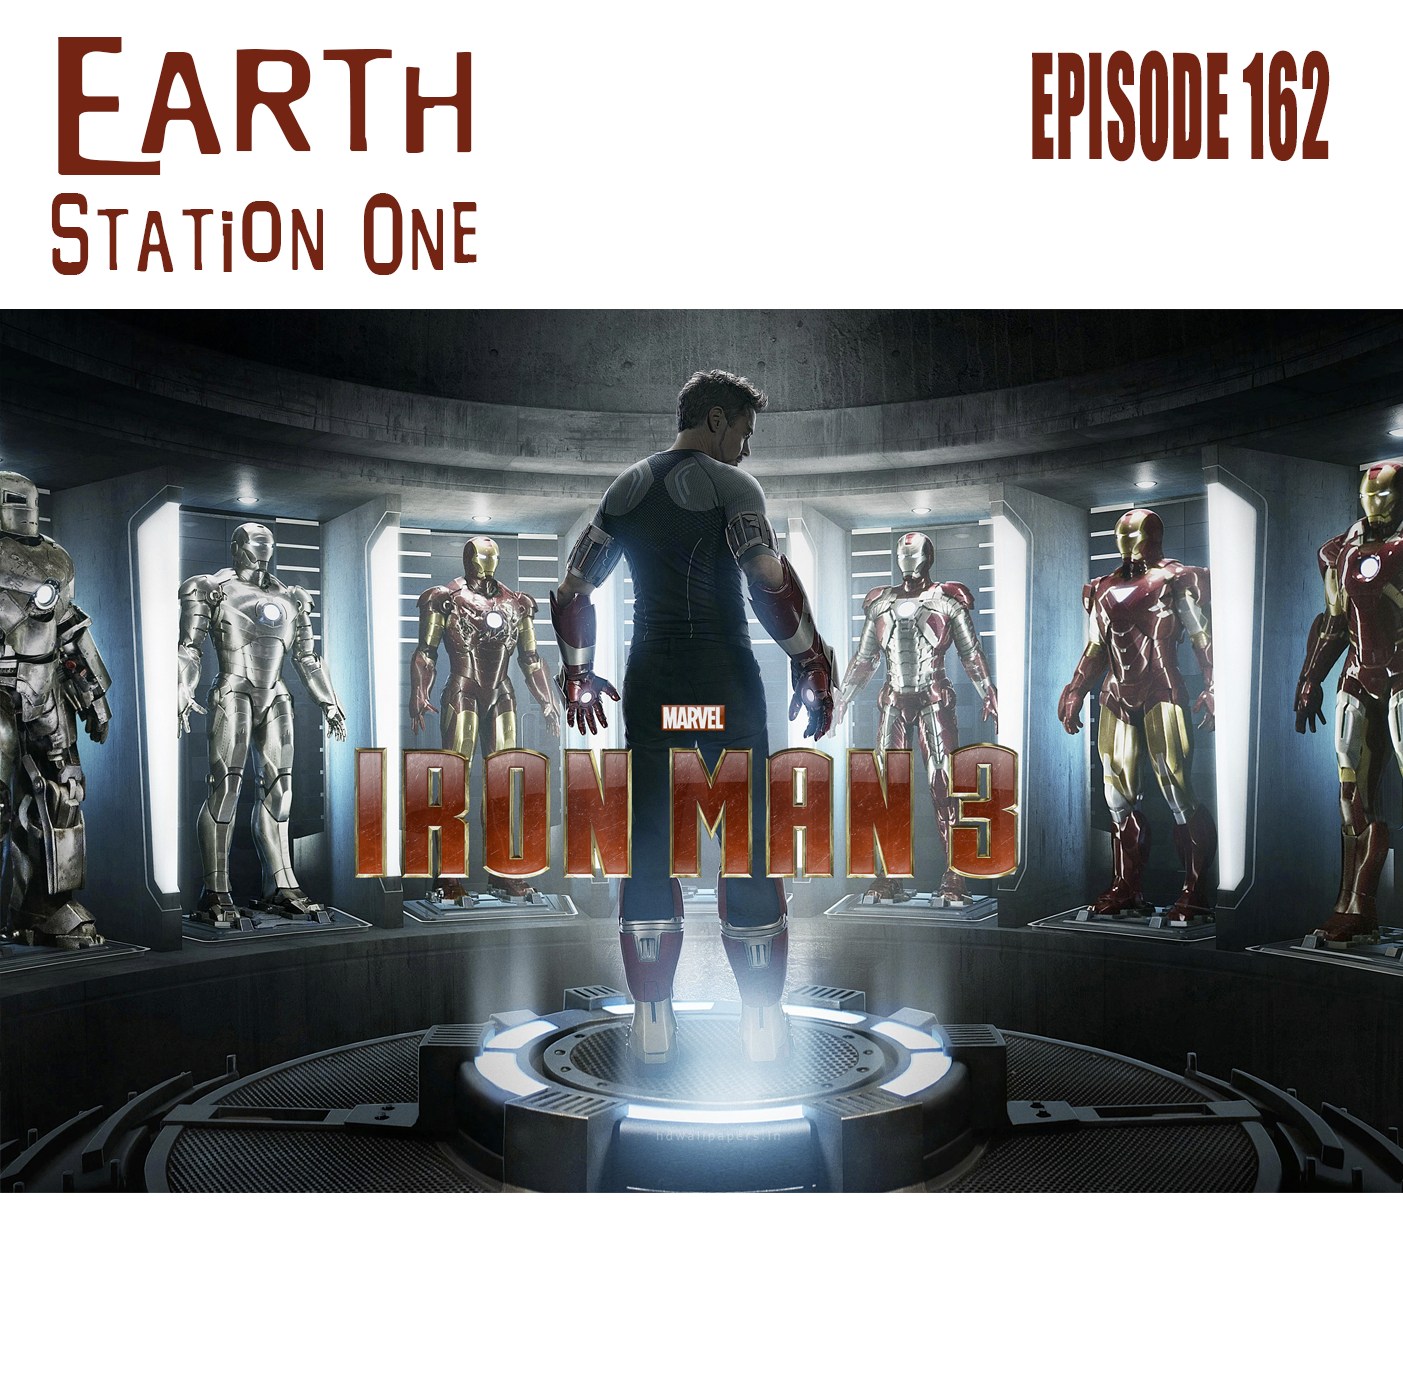 Earth Station One Episode 162 - Iron Man 3